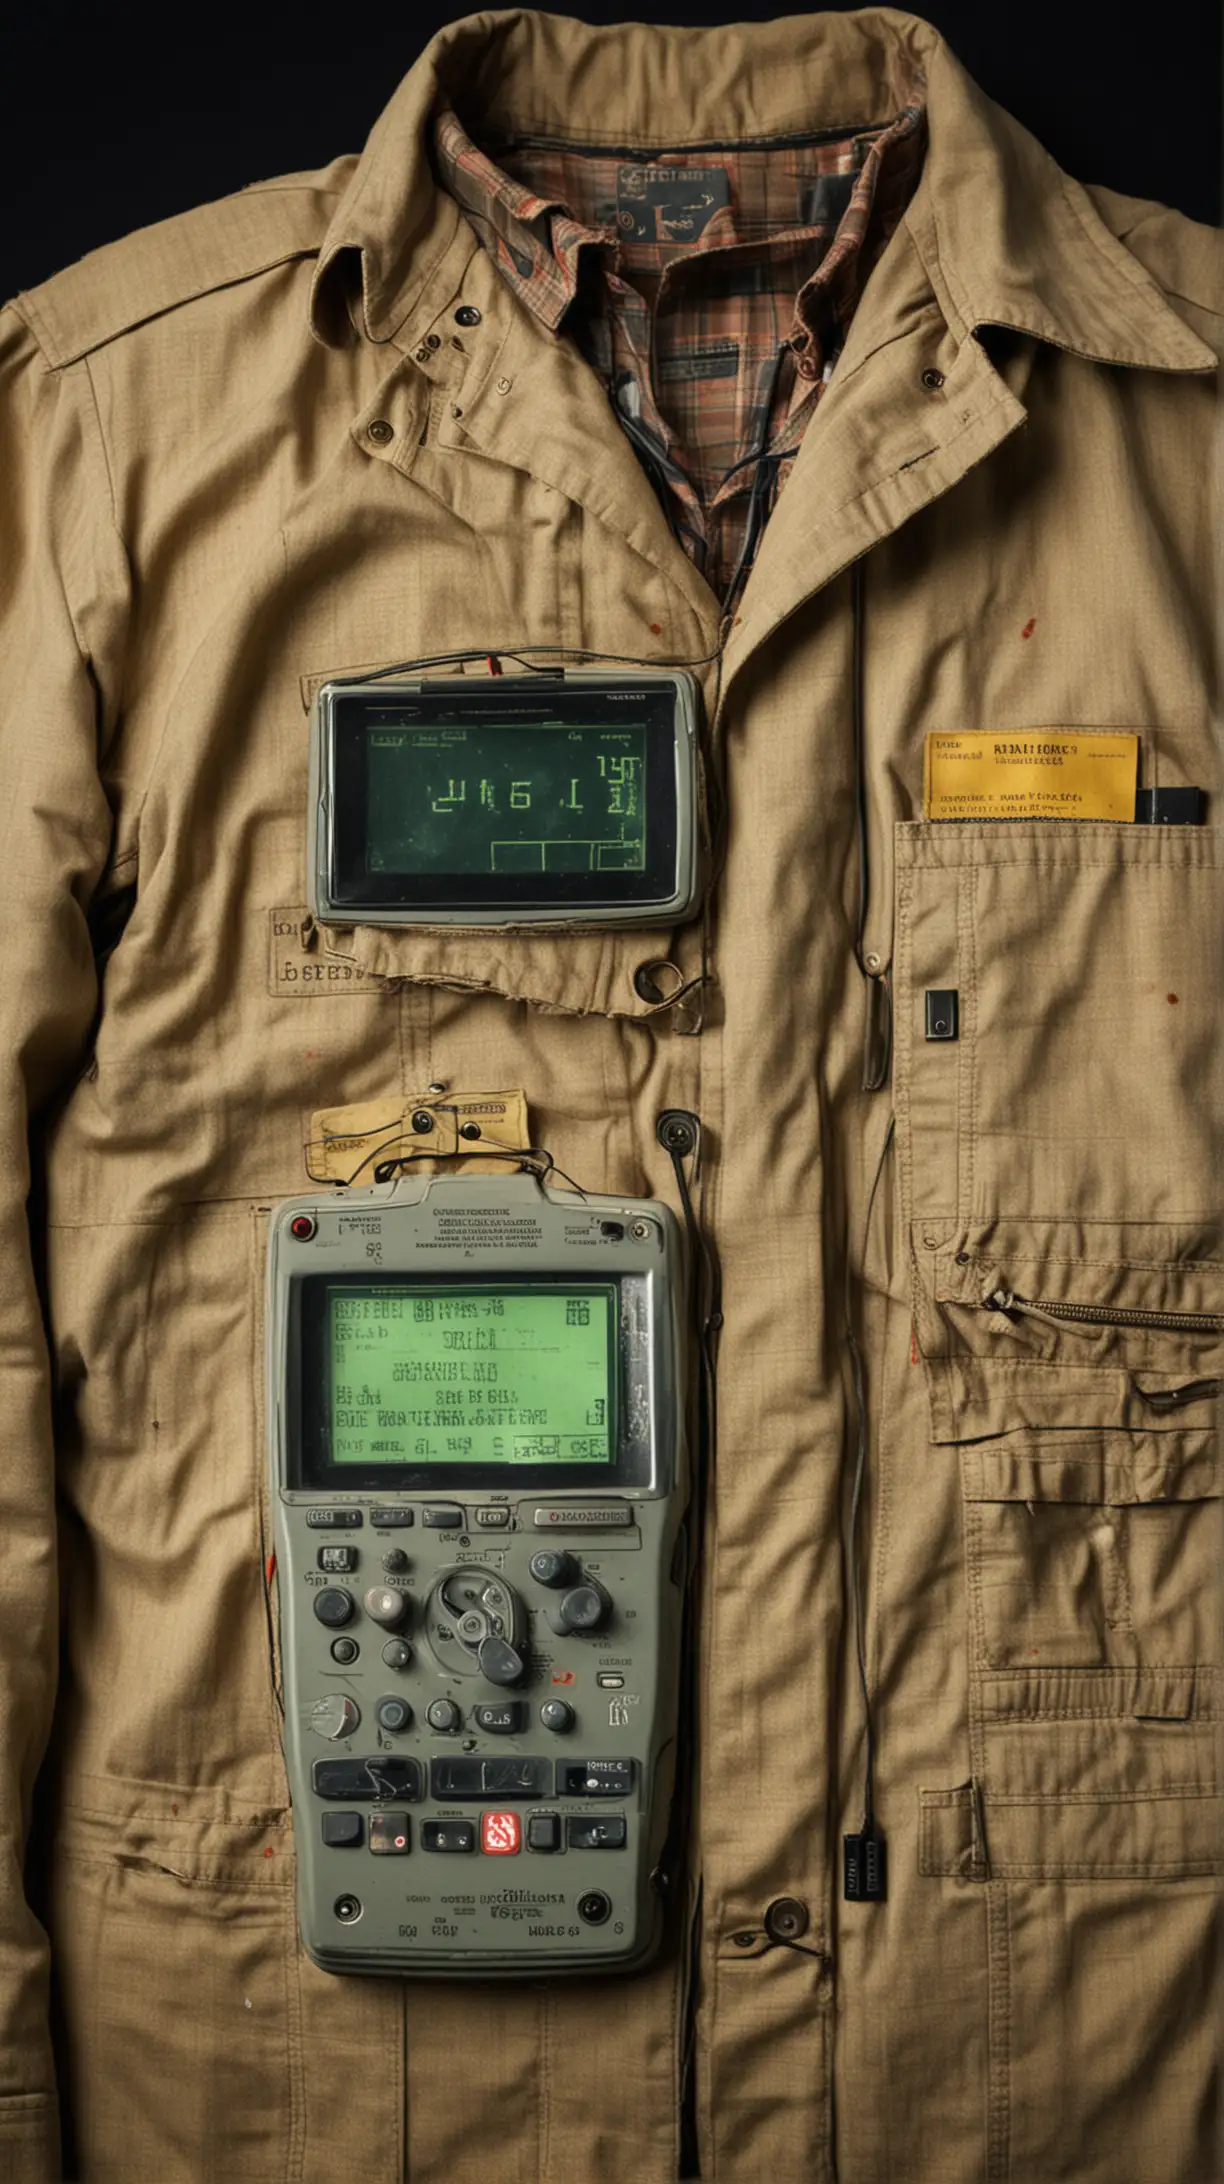 Radiation Detection: Images of Geiger counters detecting unexpected radiation levels on the clothing of the deceased, adding a layer of scientific intrigue to the mystery.